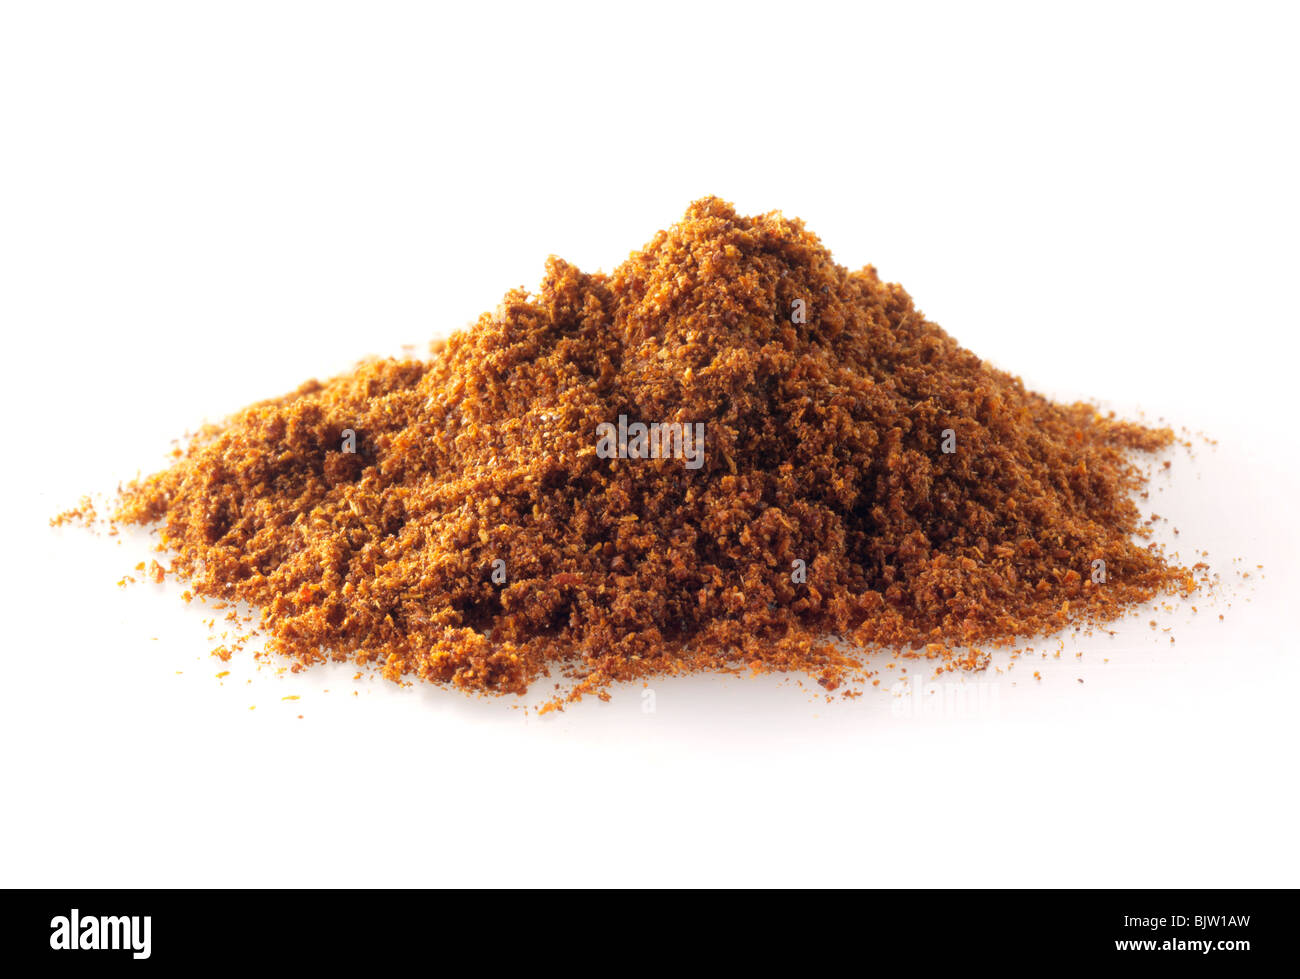 pile of Ground cayenne pepper  composed arrangement isolated against a white background Stock Photo